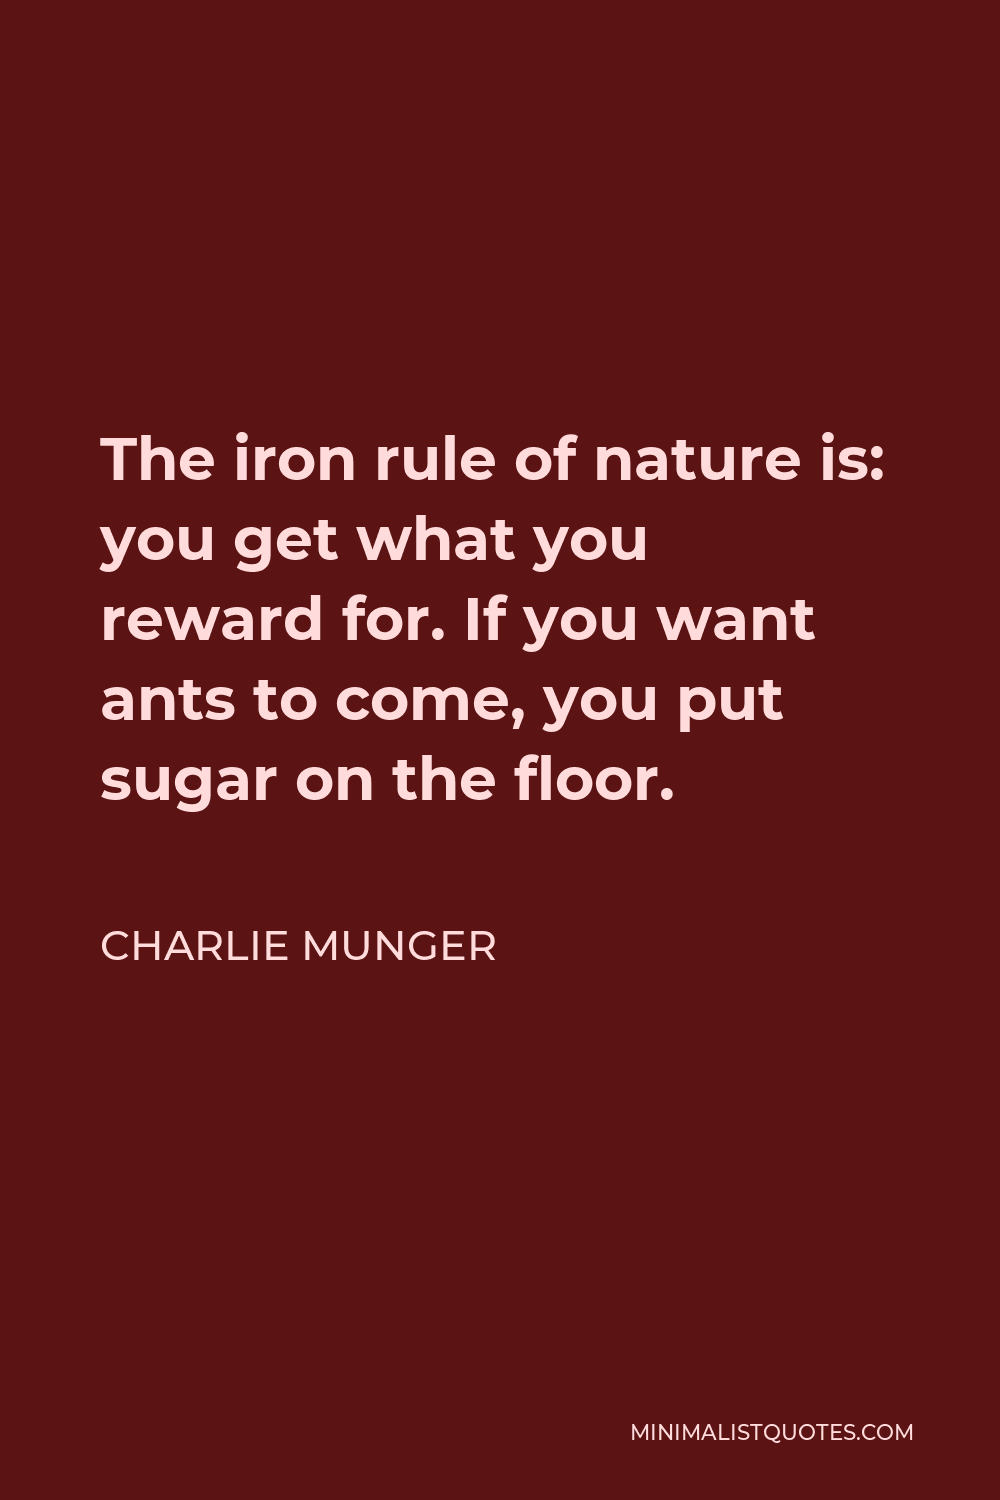 Charlie Munger Quote - The iron rule of nature is: you get what you reward for. If you want ants to come, you put sugar on the floor.